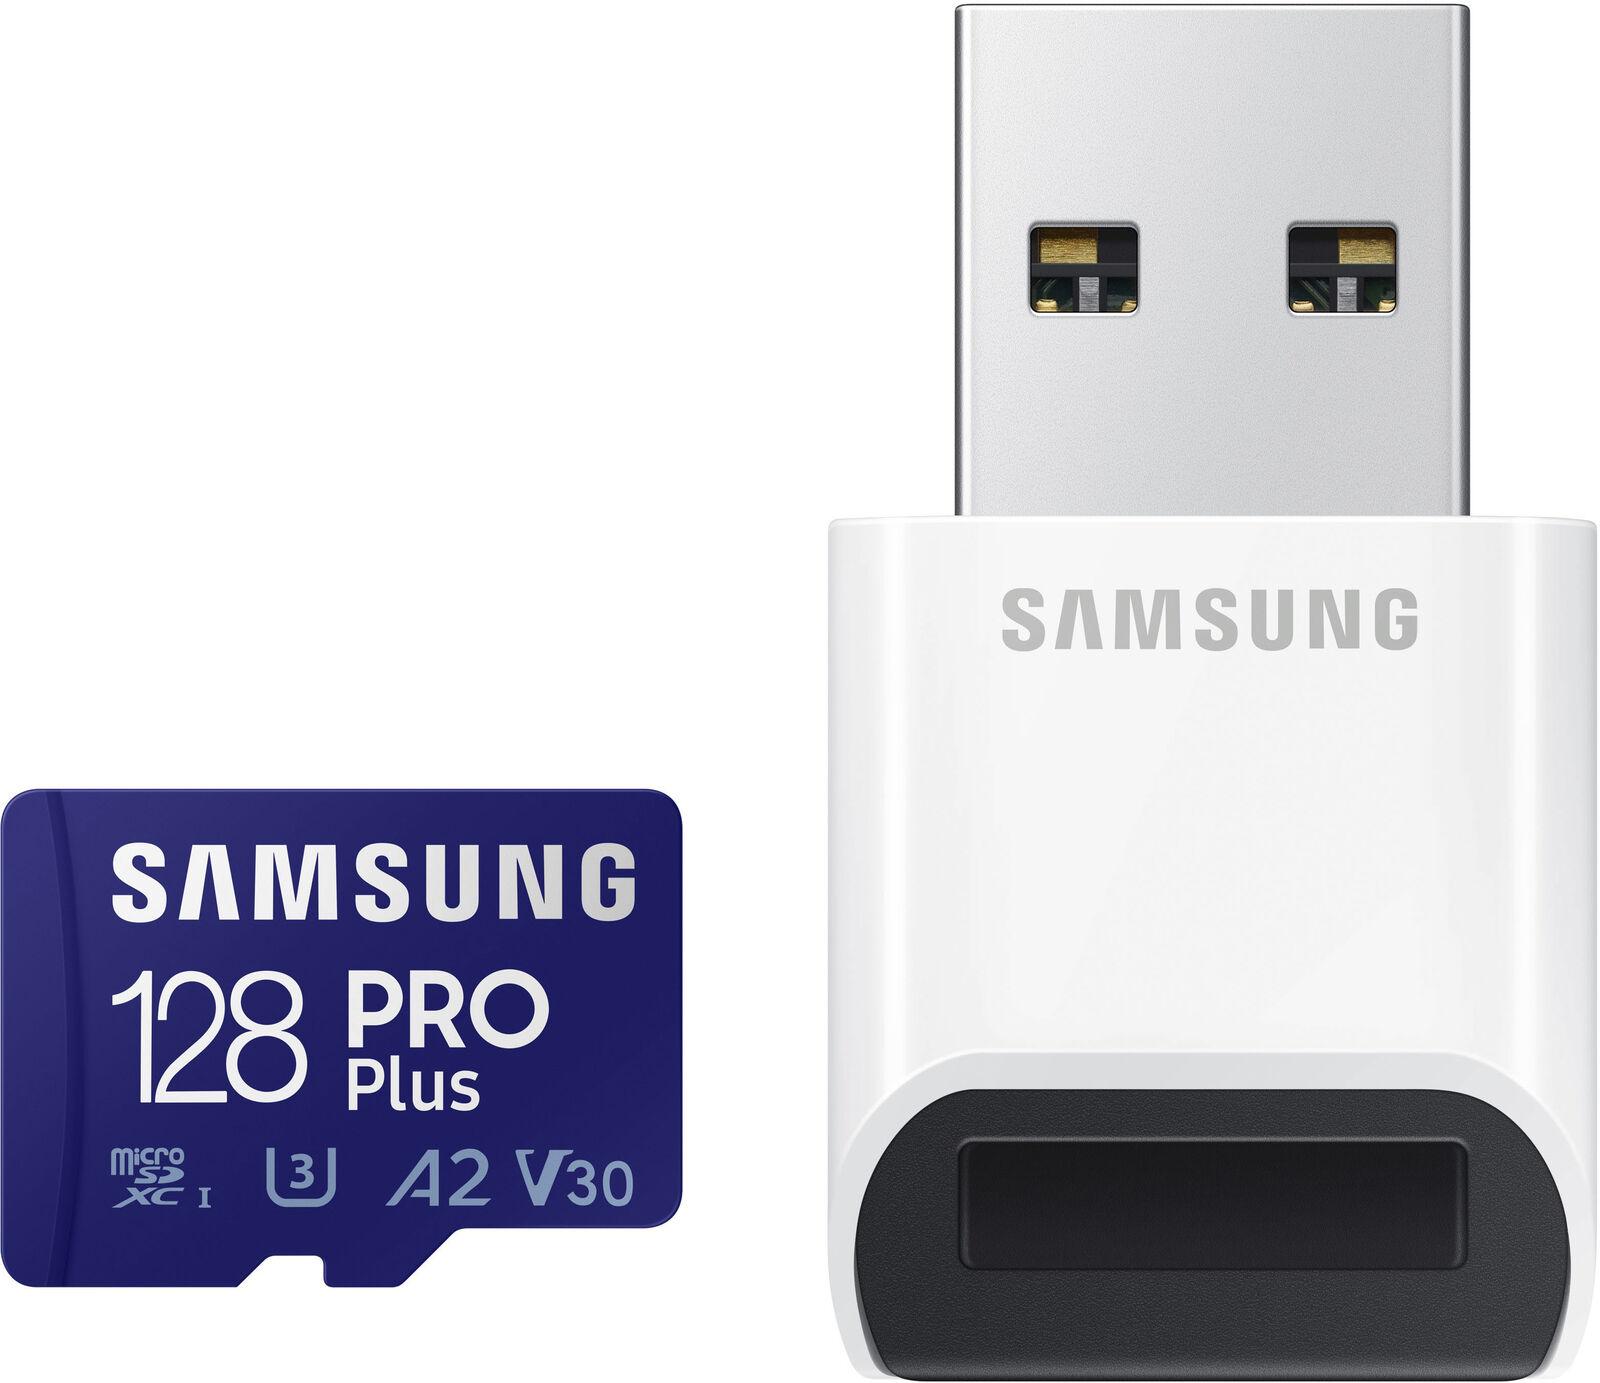 128GB Samsung Pro Plus A2 V30 microSDXC Memory Card with Reader for $20.99